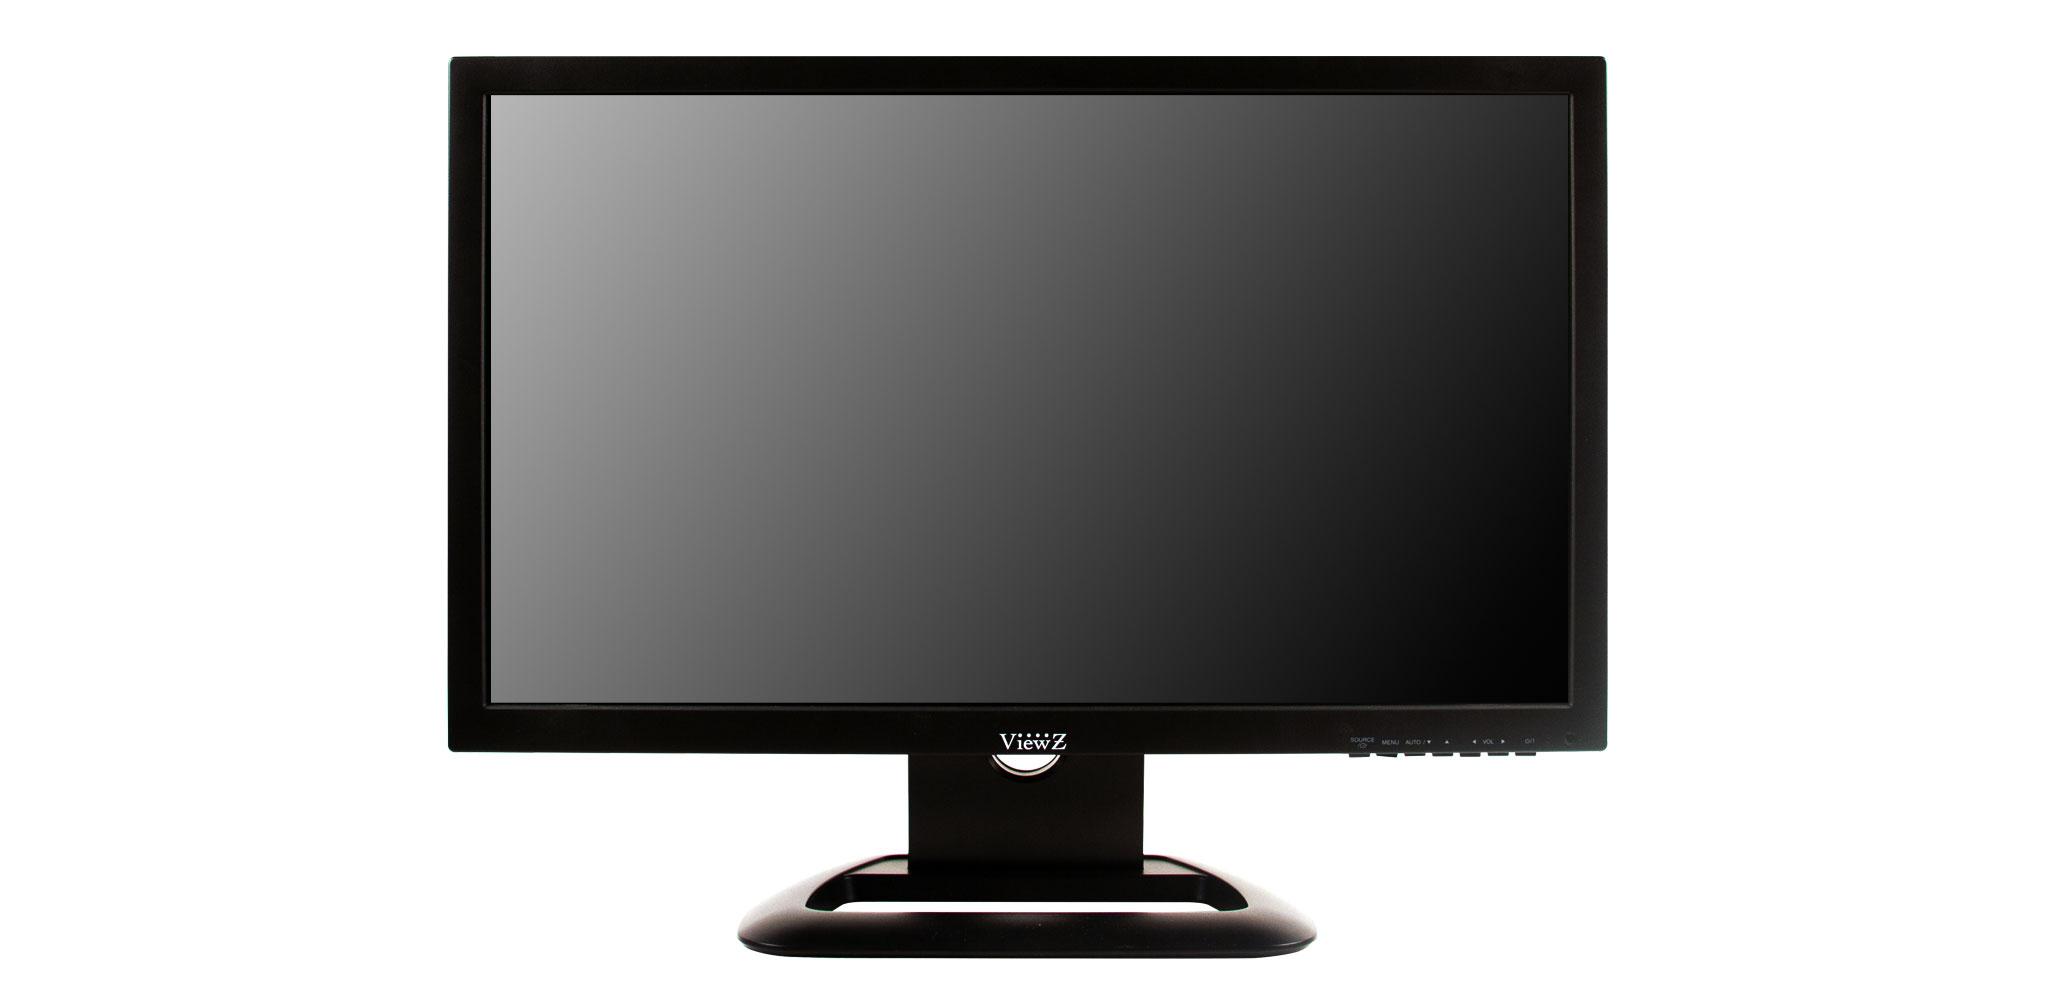 VZ-215IPM 21.5 inch 1920x1080 Full HD LED IP Input Monitor with Android OS by ViewZ